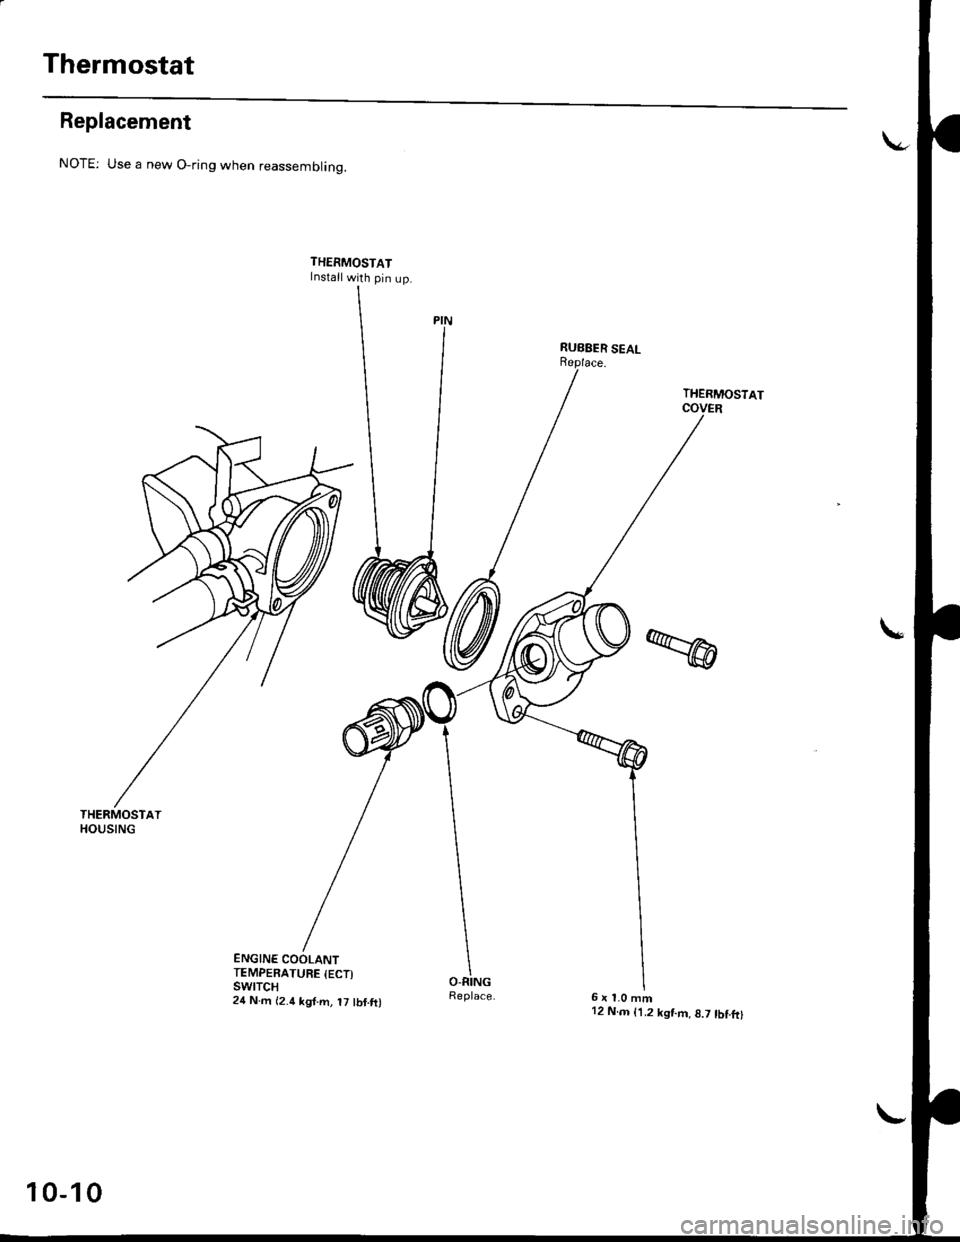 HONDA CIVIC 1997 6.G Workshop Manual Thermostat
Replacement
THERMOSTATHOUSING
NOTE: Use a new O-ring when reassemblinq.
THERMOSTATInstall with pin up.
ENGINE COOLANTTEMPERATURE {ECT)swtTcH24 N.m {2.4 kgf.m, t7 tbf.ft)
THERMOSTAT
6x1.0mm1